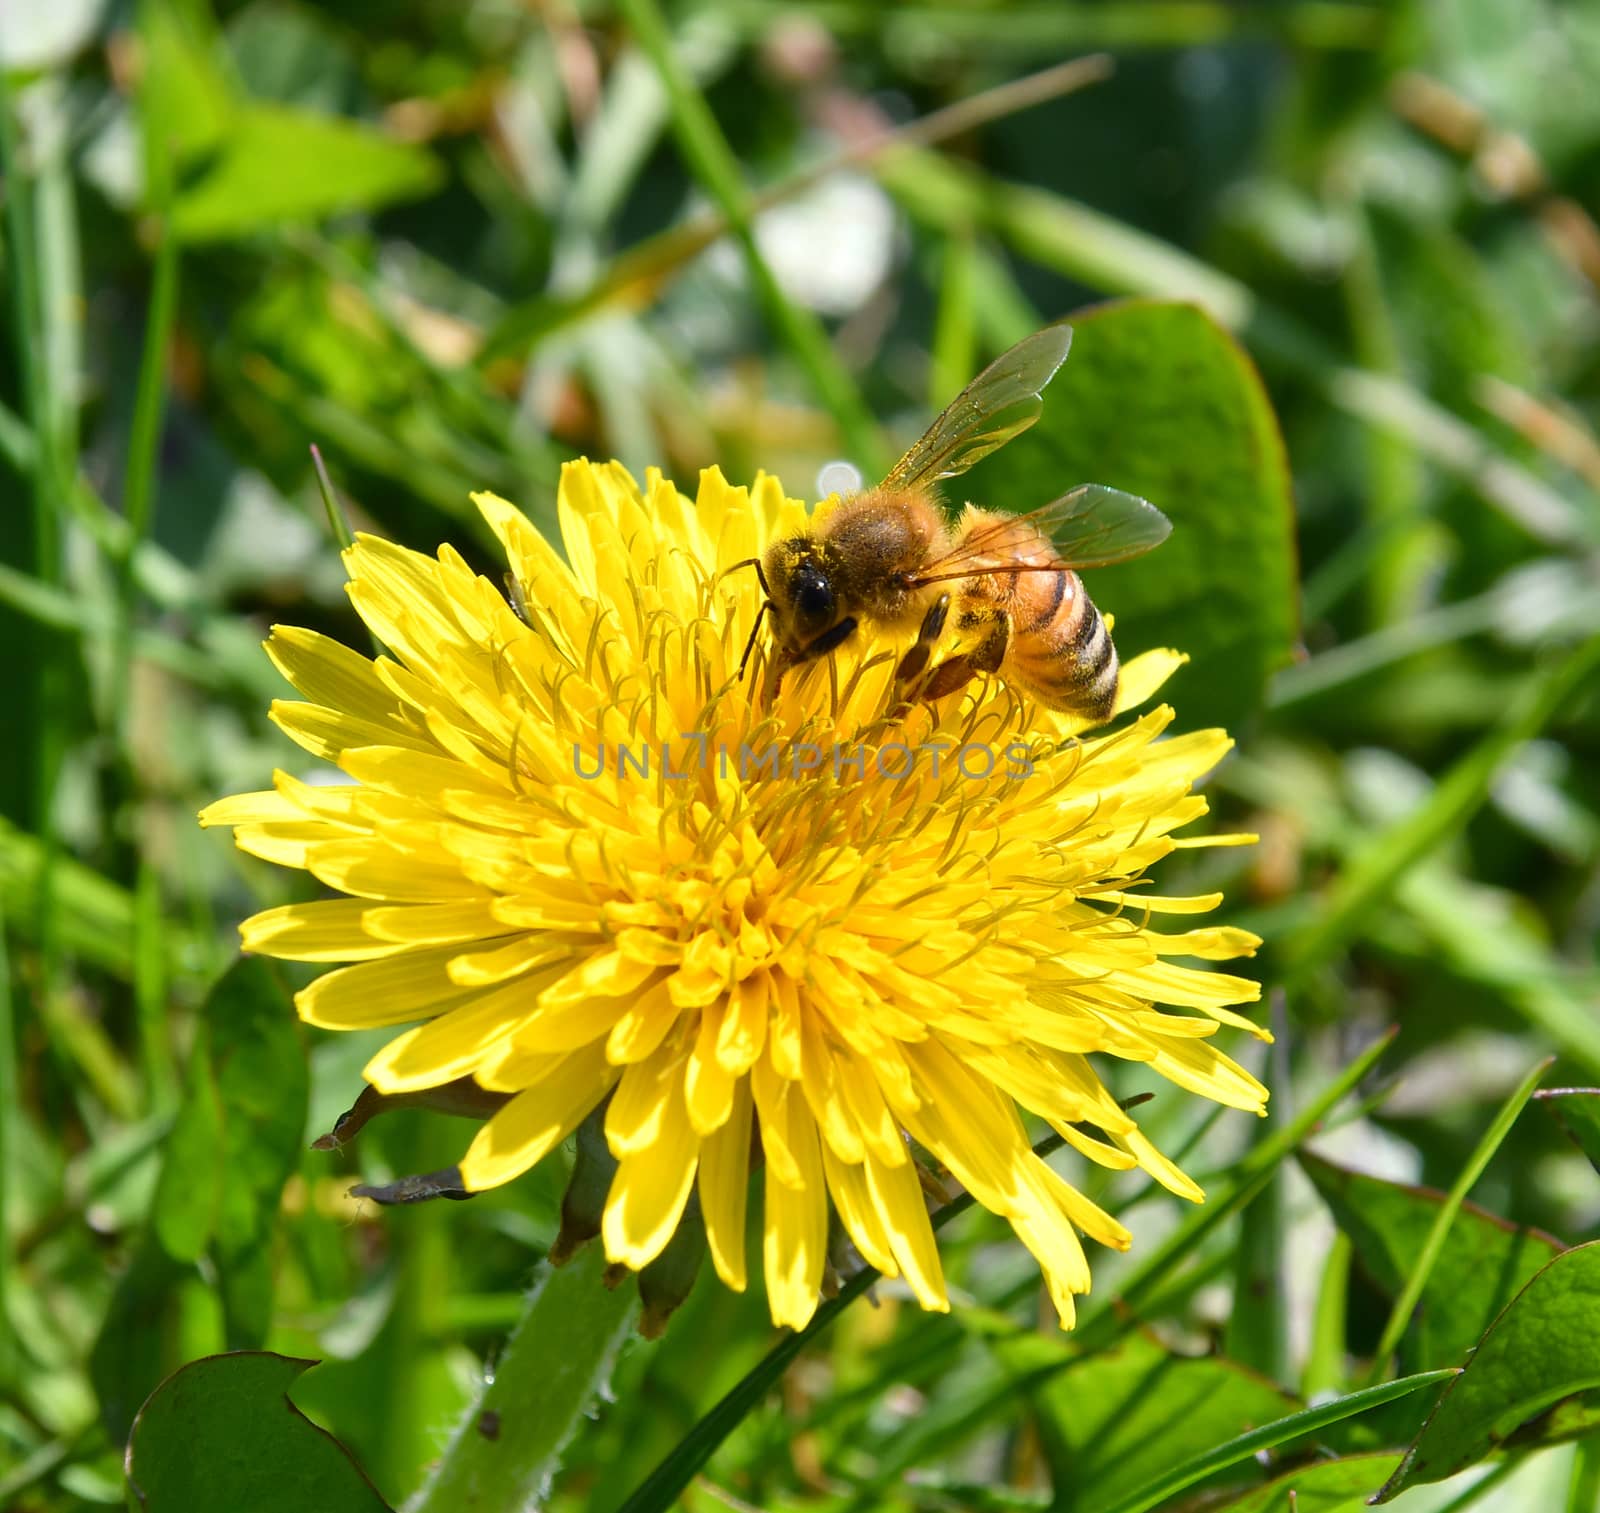 The bee on the dandelion flower by bongia